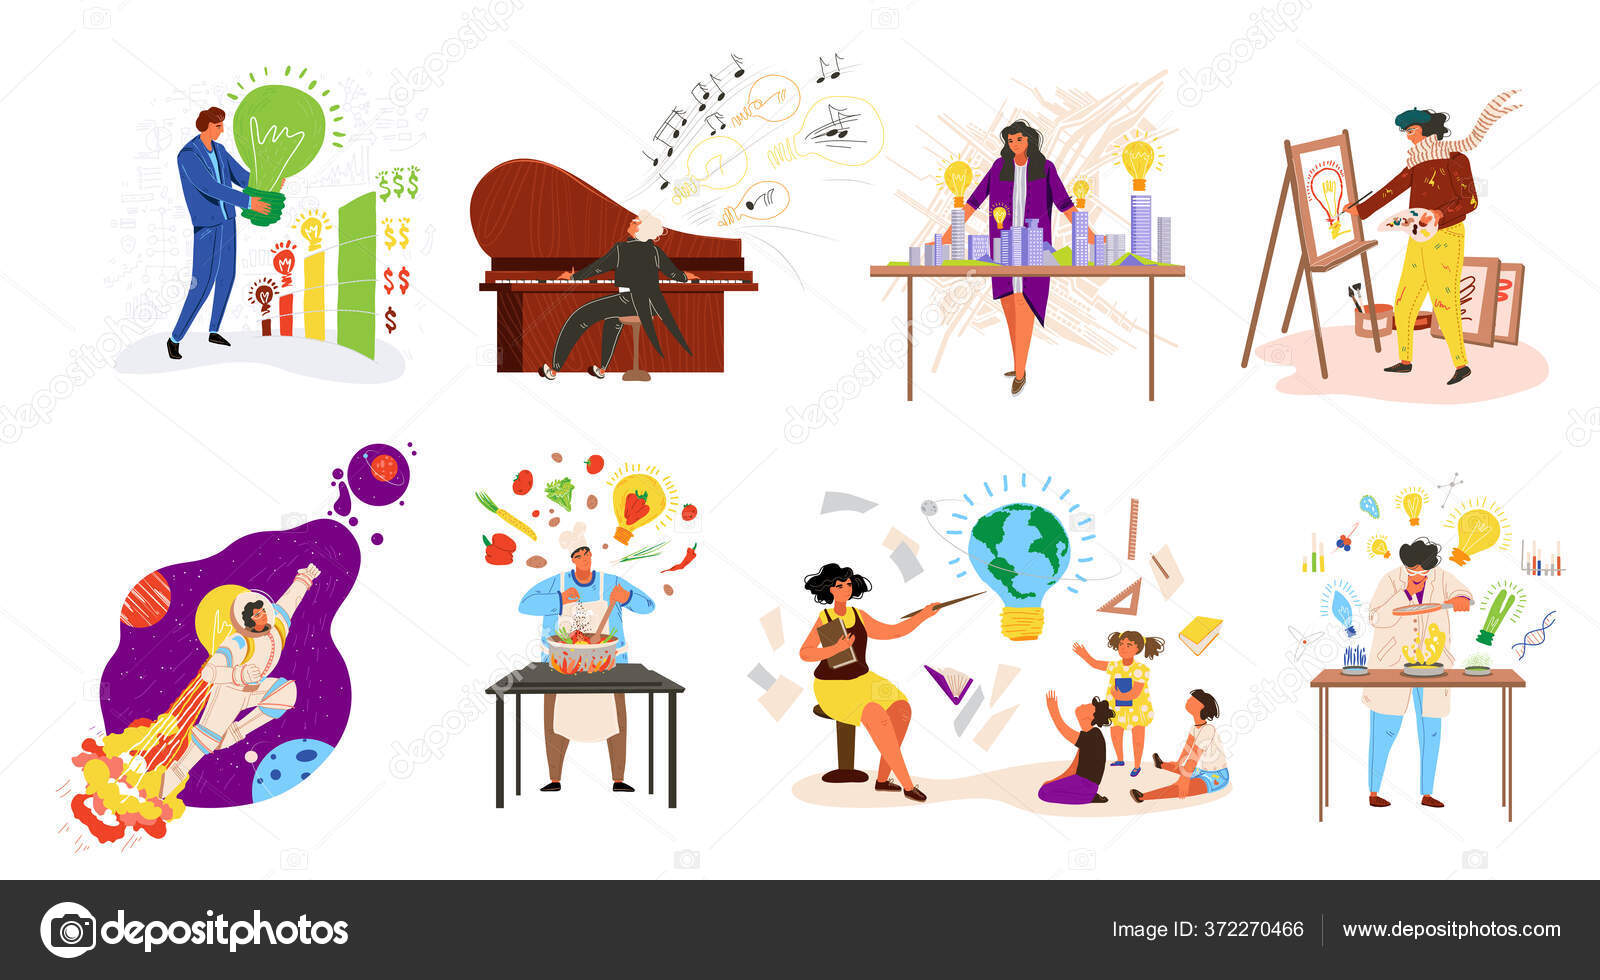 Adult People and Their Creative and Artistic Hobbies, Vectors